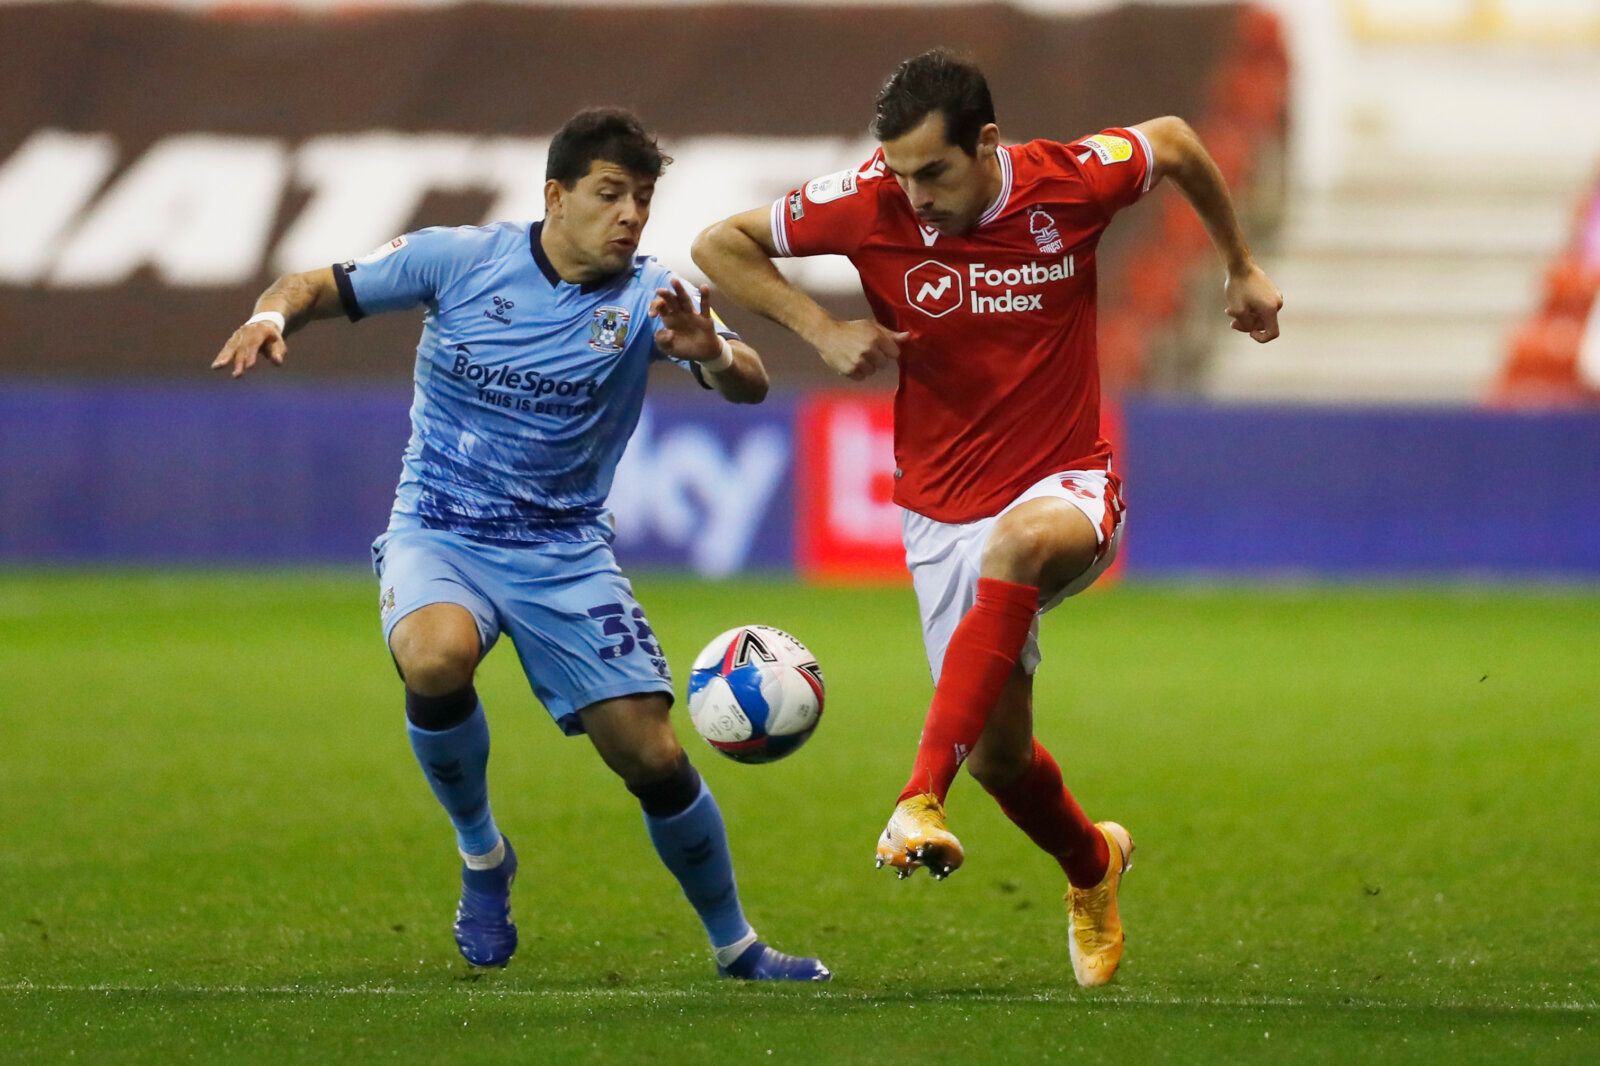 Soccer Football - Championship - Nottingham Forest v Coventry City - The City Ground, Nottingham, Britain - November 4, 2020 Nottingham Forest's Yuri Ribeiro in action with Coventry City's Gustavo Hamer Action Images/Matthew Childs EDITORIAL USE ONLY. No use with unauthorized audio, video, data, fixture lists, club/league logos or 'live' services. Online in-match use limited to 75 images, no video emulation. No use in betting, games or single club /league/player publications.  Please contact you